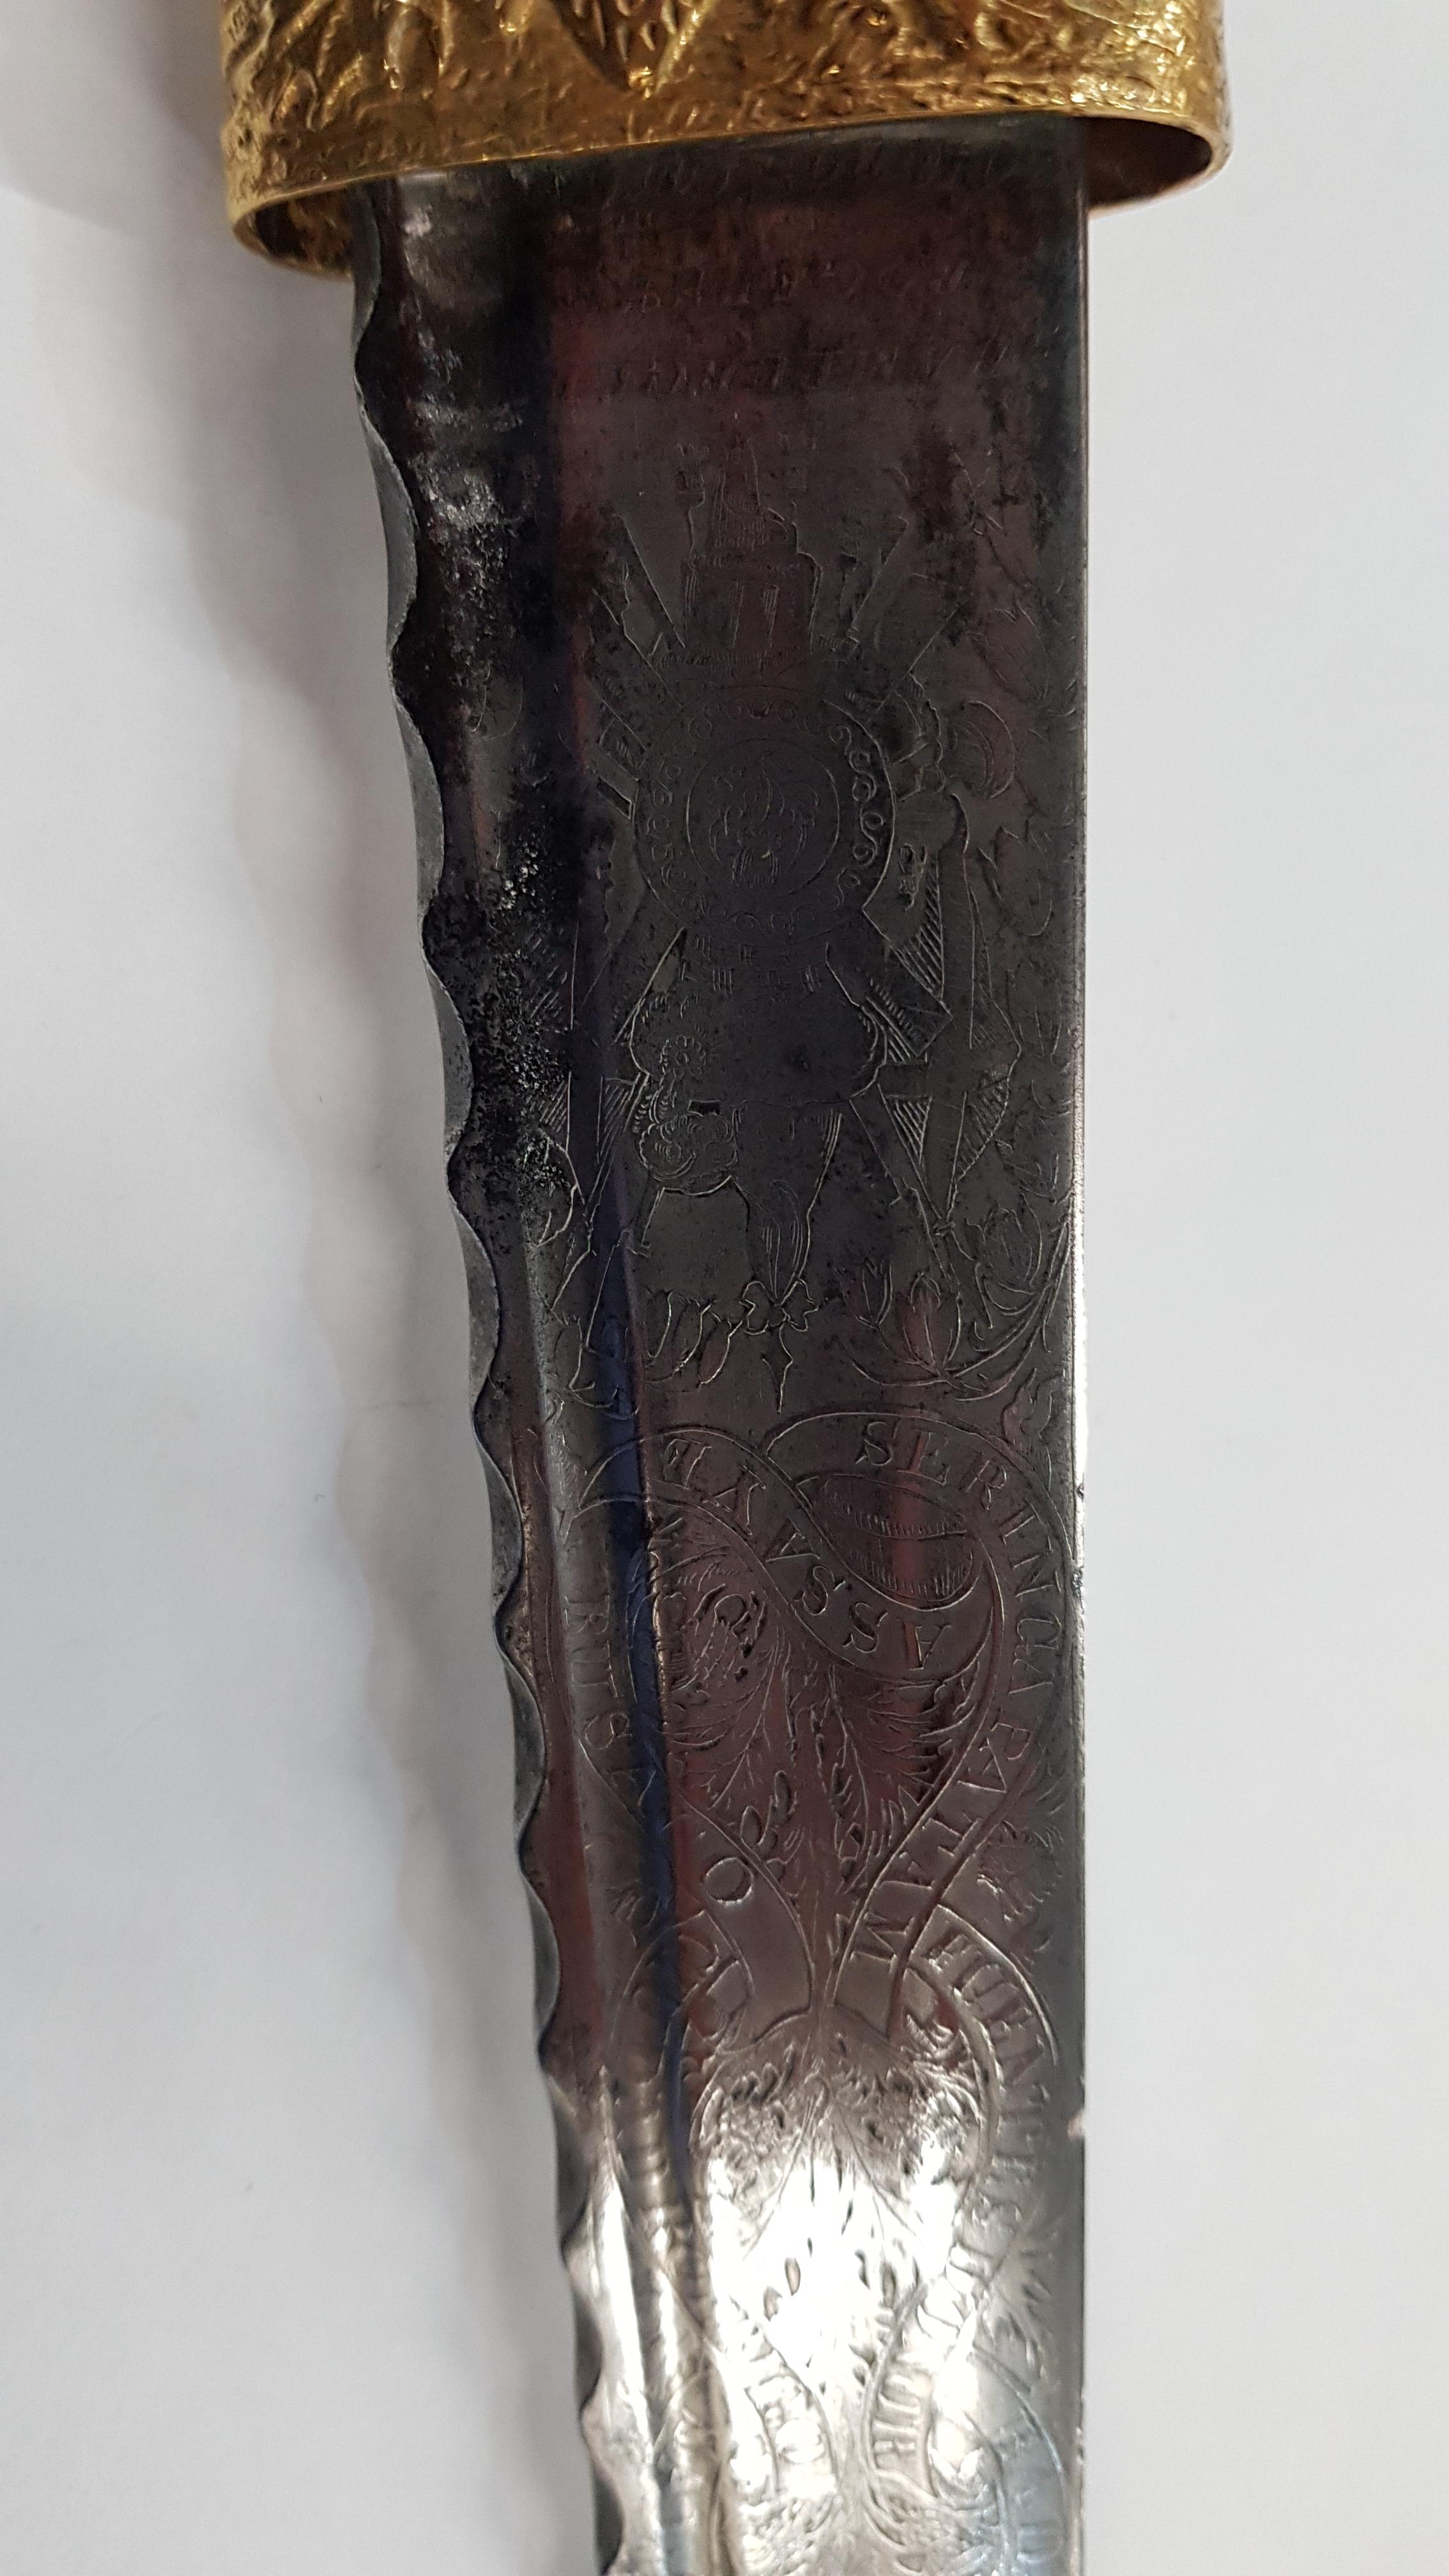 STUNNING DIRK HEAVILY DETAILED ON BLADE. LXXIV 74TH HIGHLANDERS COMPLETE WITH SHEATH - Image 7 of 9